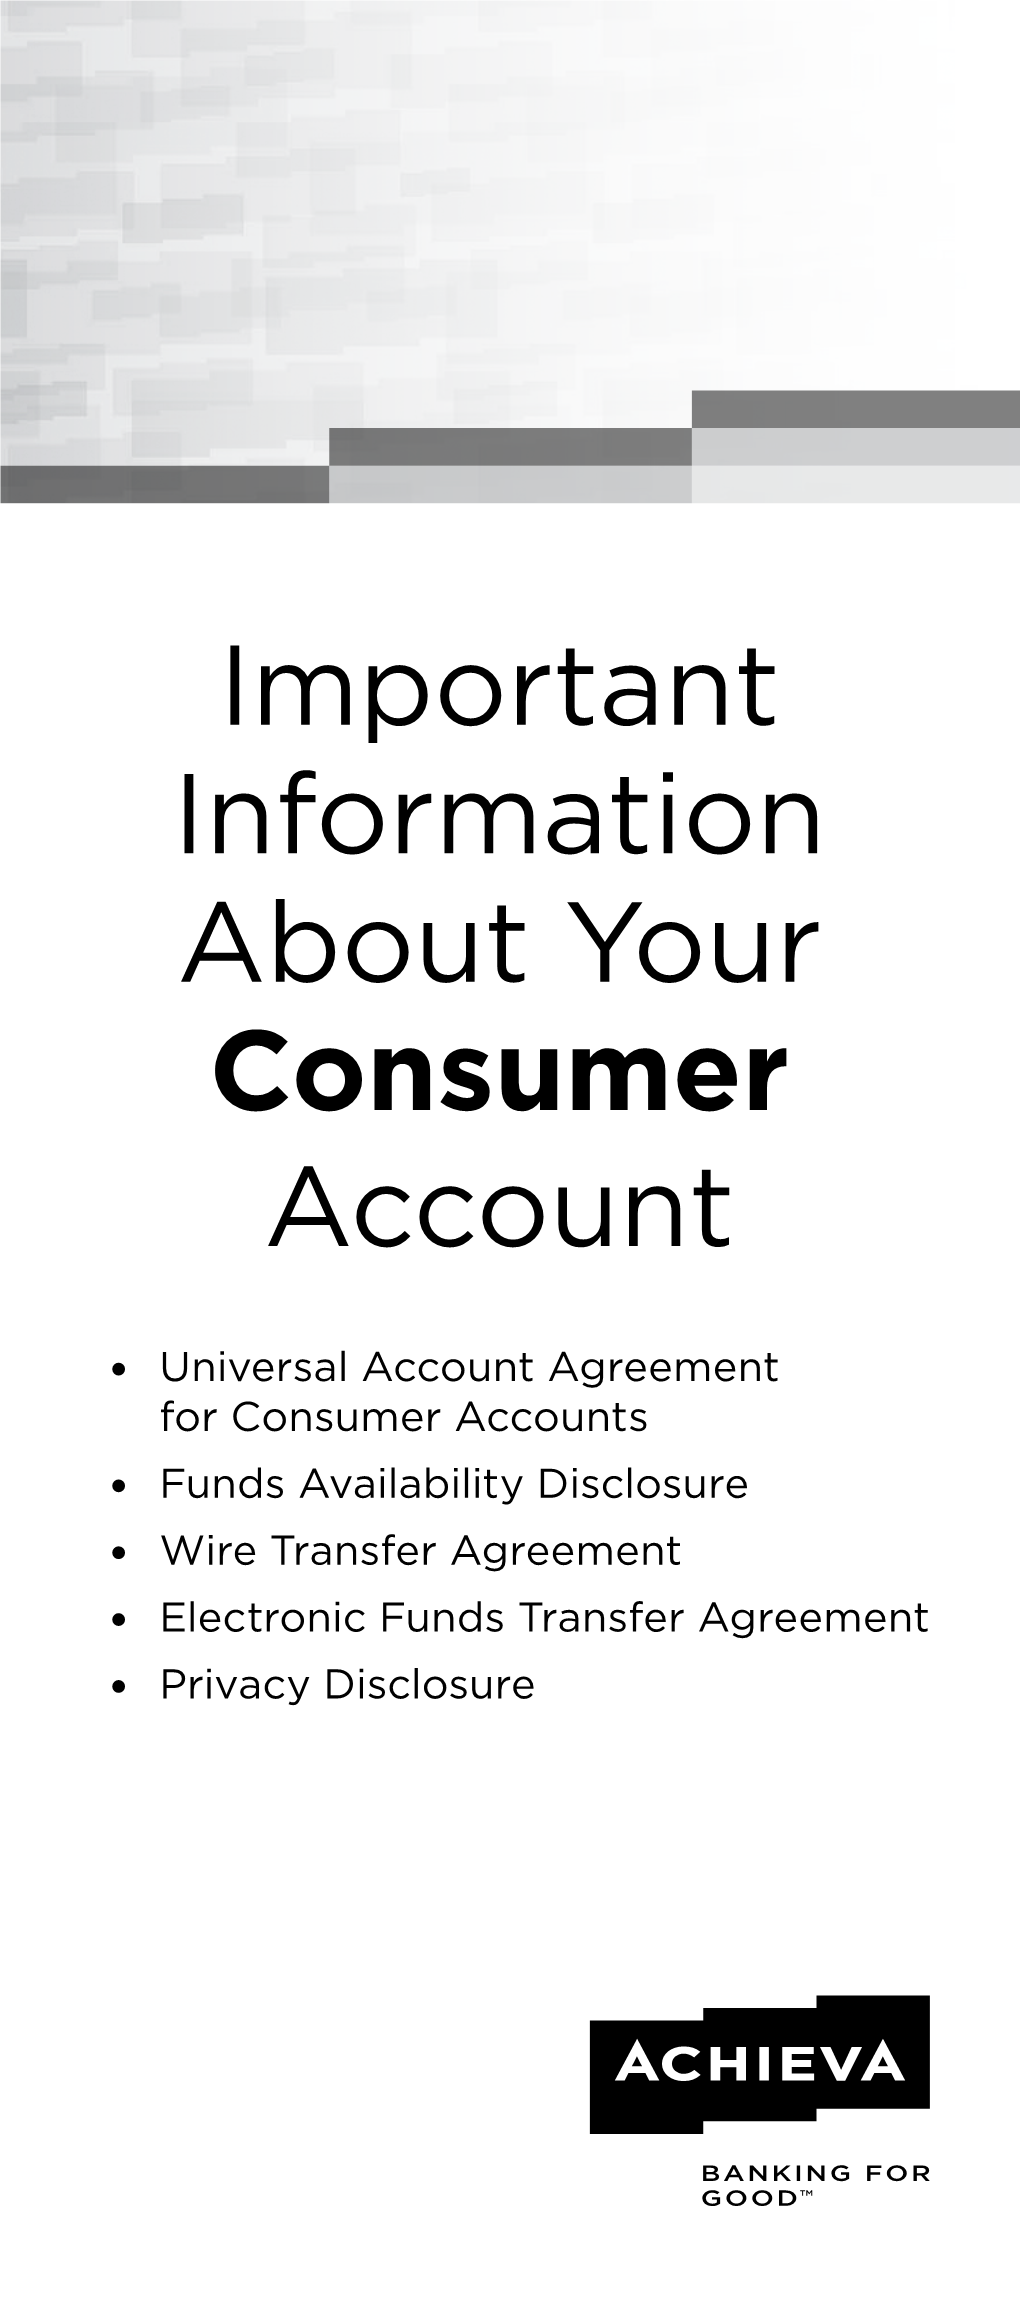 Important Information About Your Consumer Account